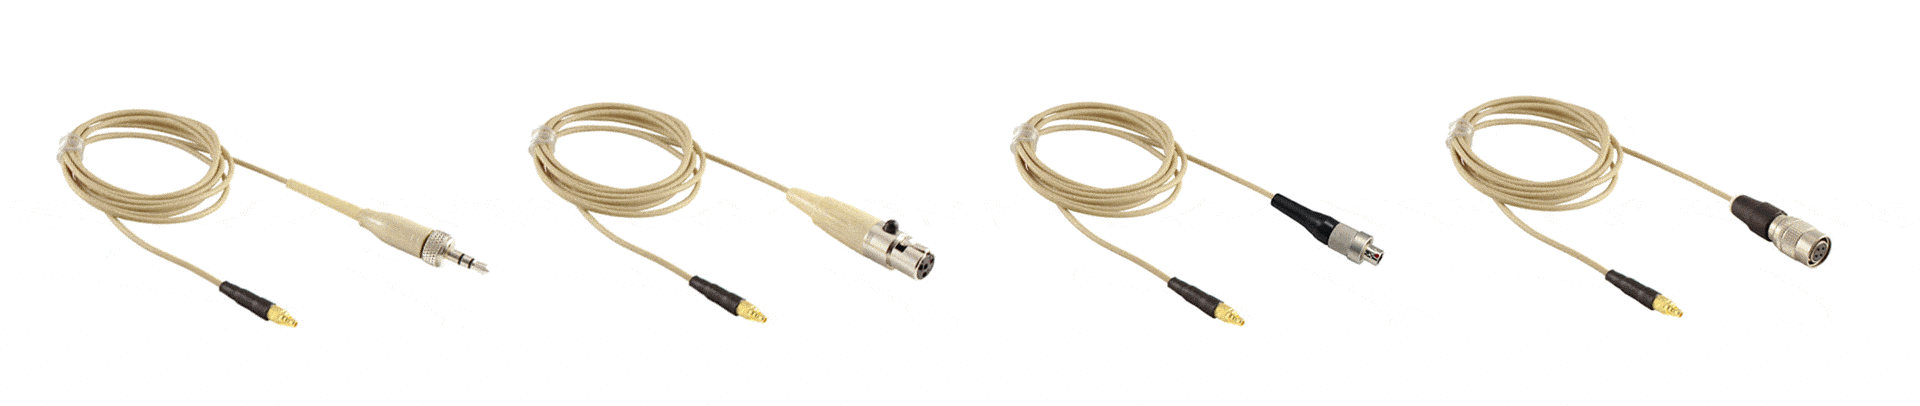 detachable-cable-for-countryman-e6-earset-microphone